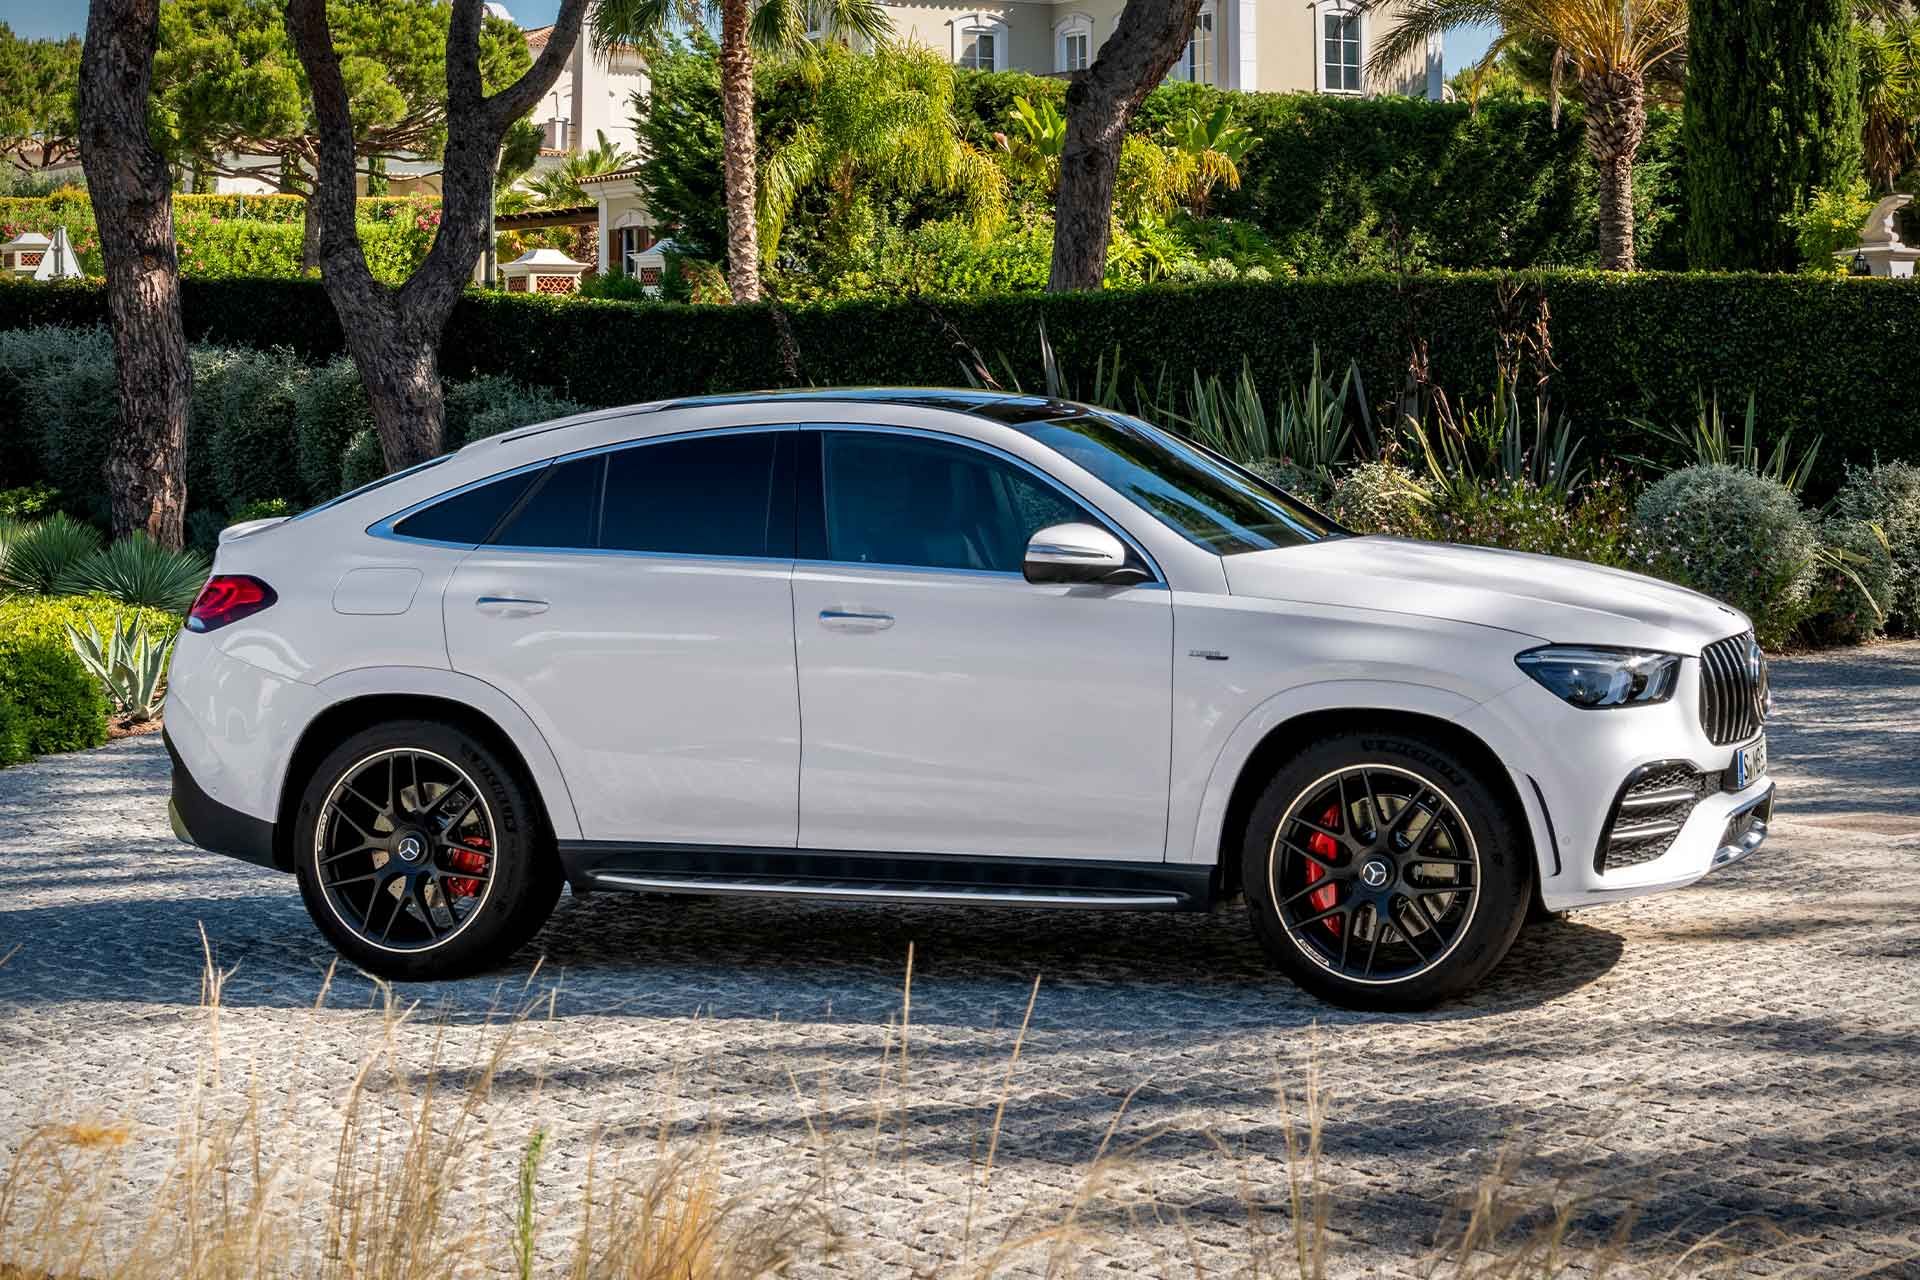 2021 Mercedes-AMG GLE 53 Coupe | Mercedes benz gle coupe, Benz suv, Mercedes  suv